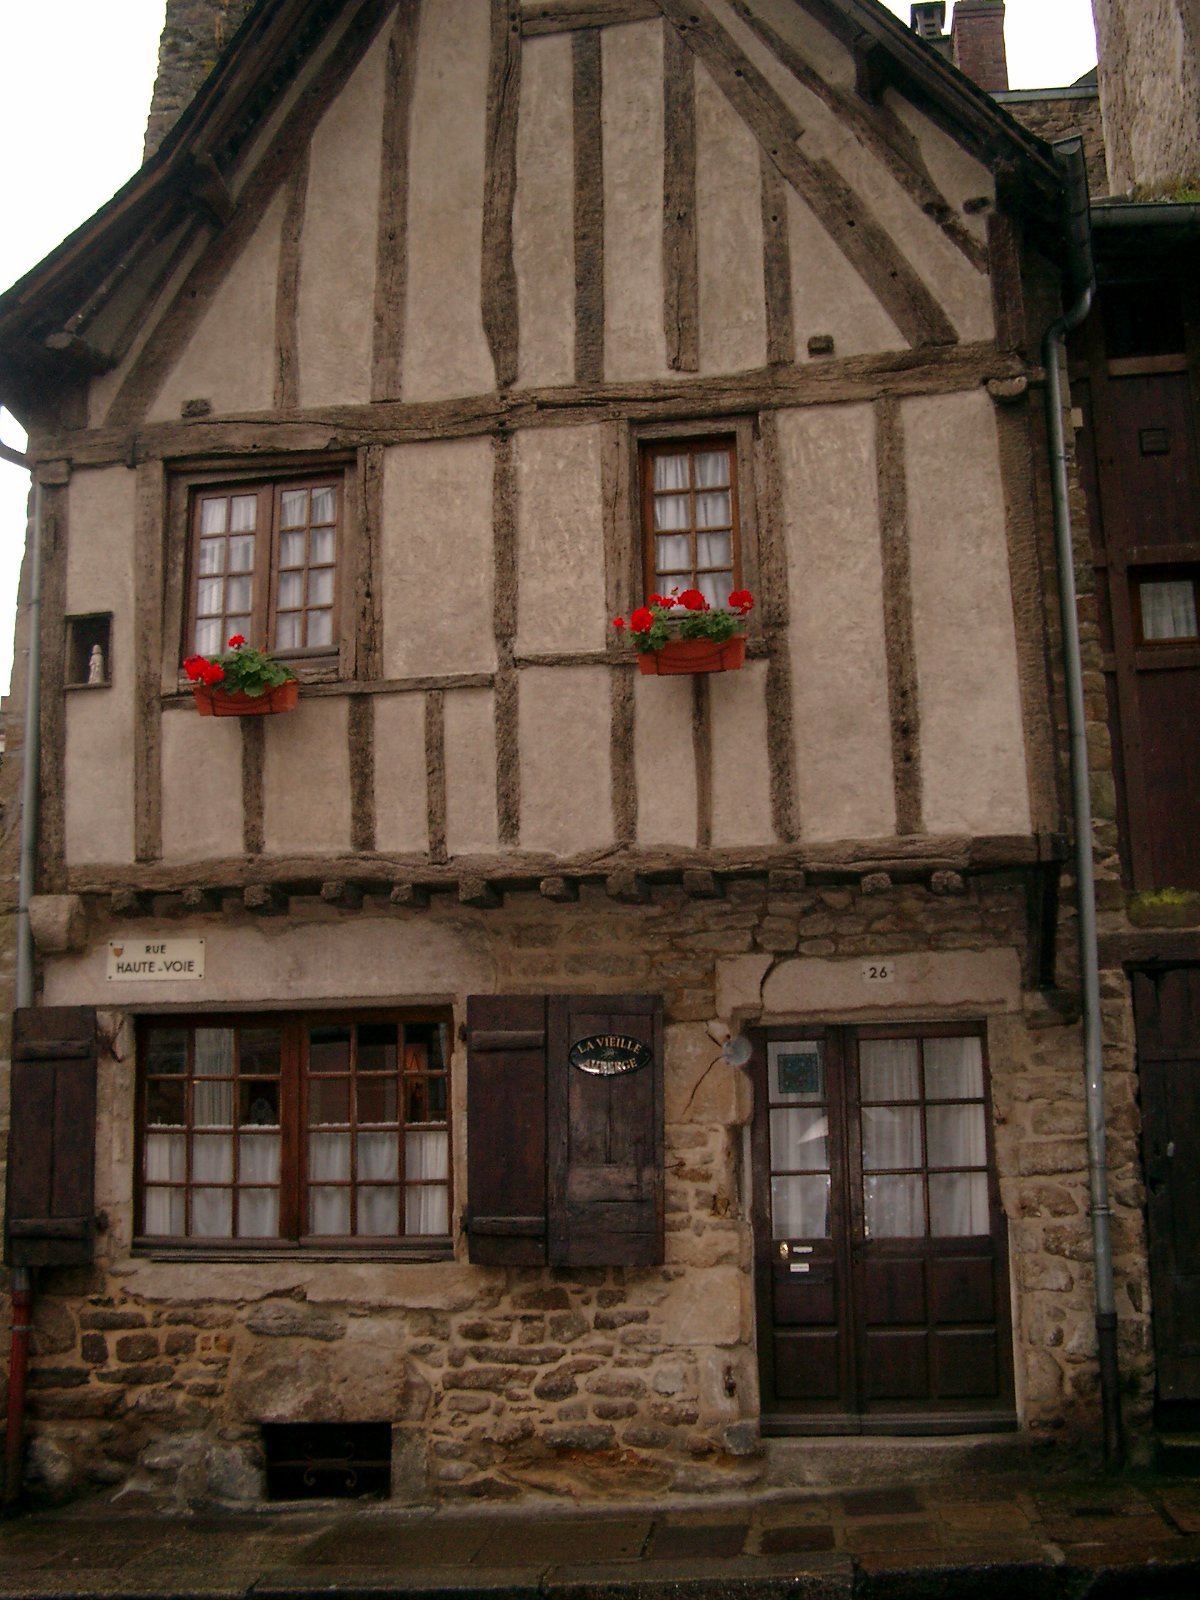 File:Old french house.jpg - Wikimedia Commons